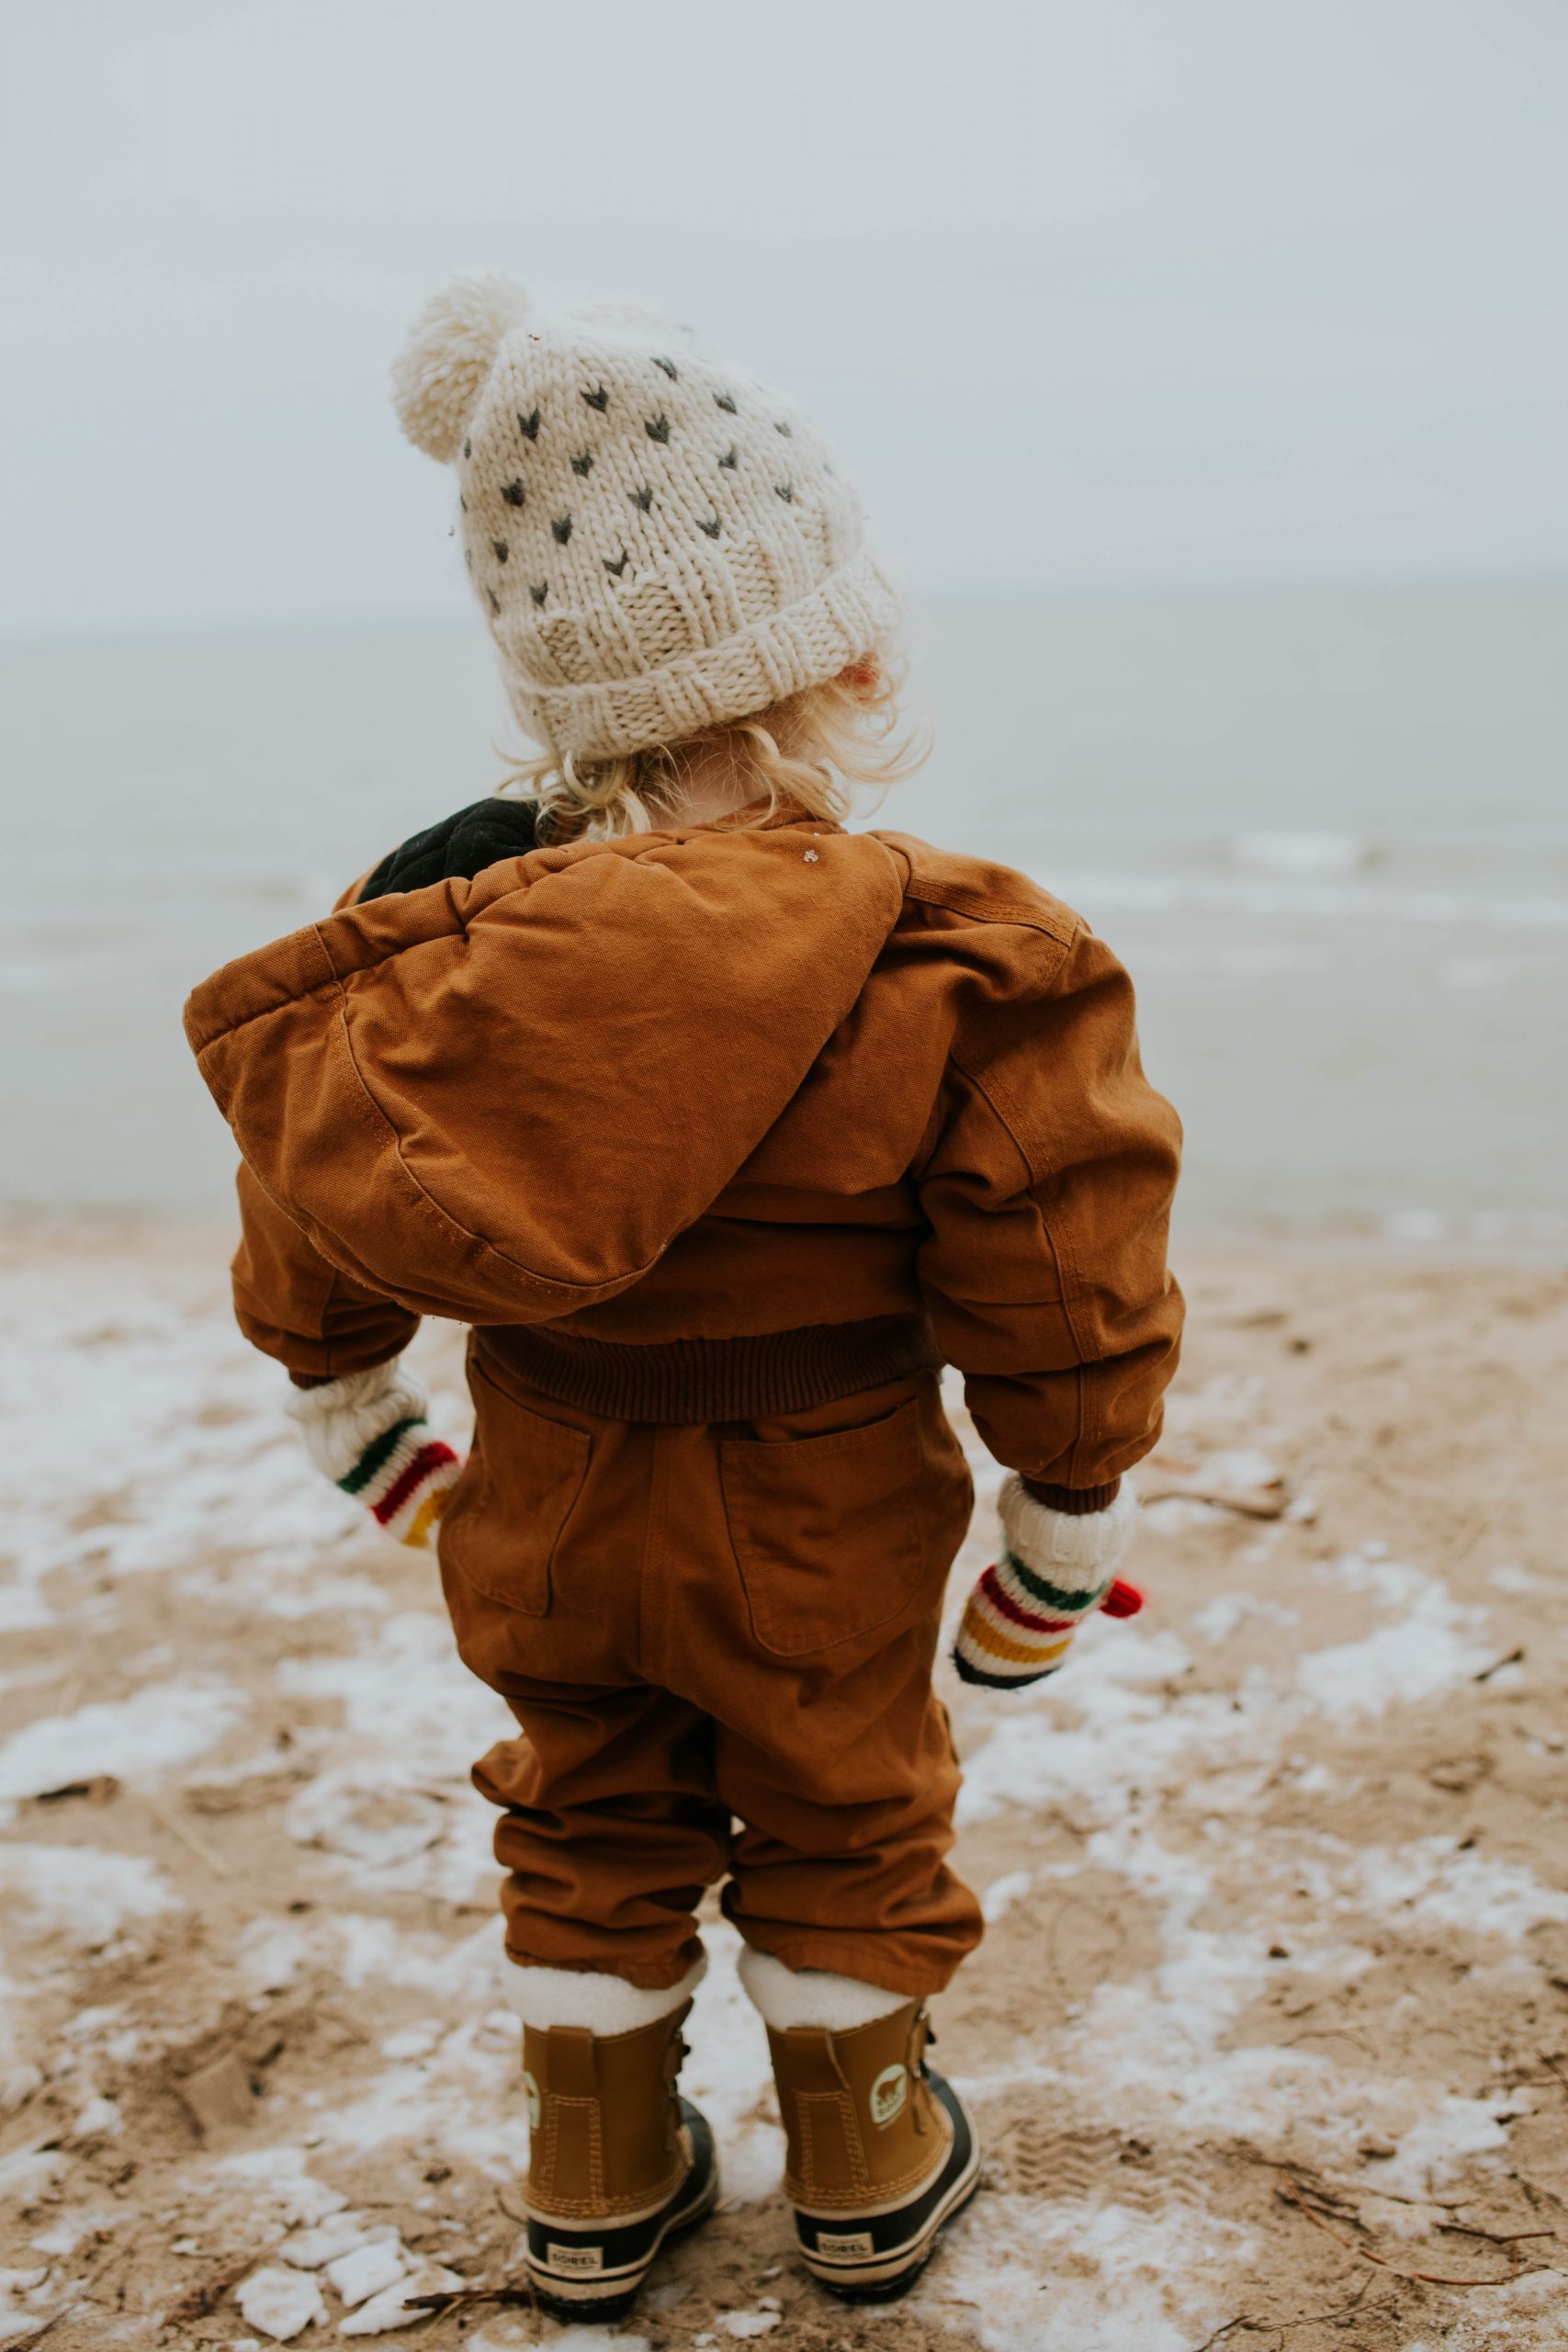 Carhartt Apparel for Kids in The Winter